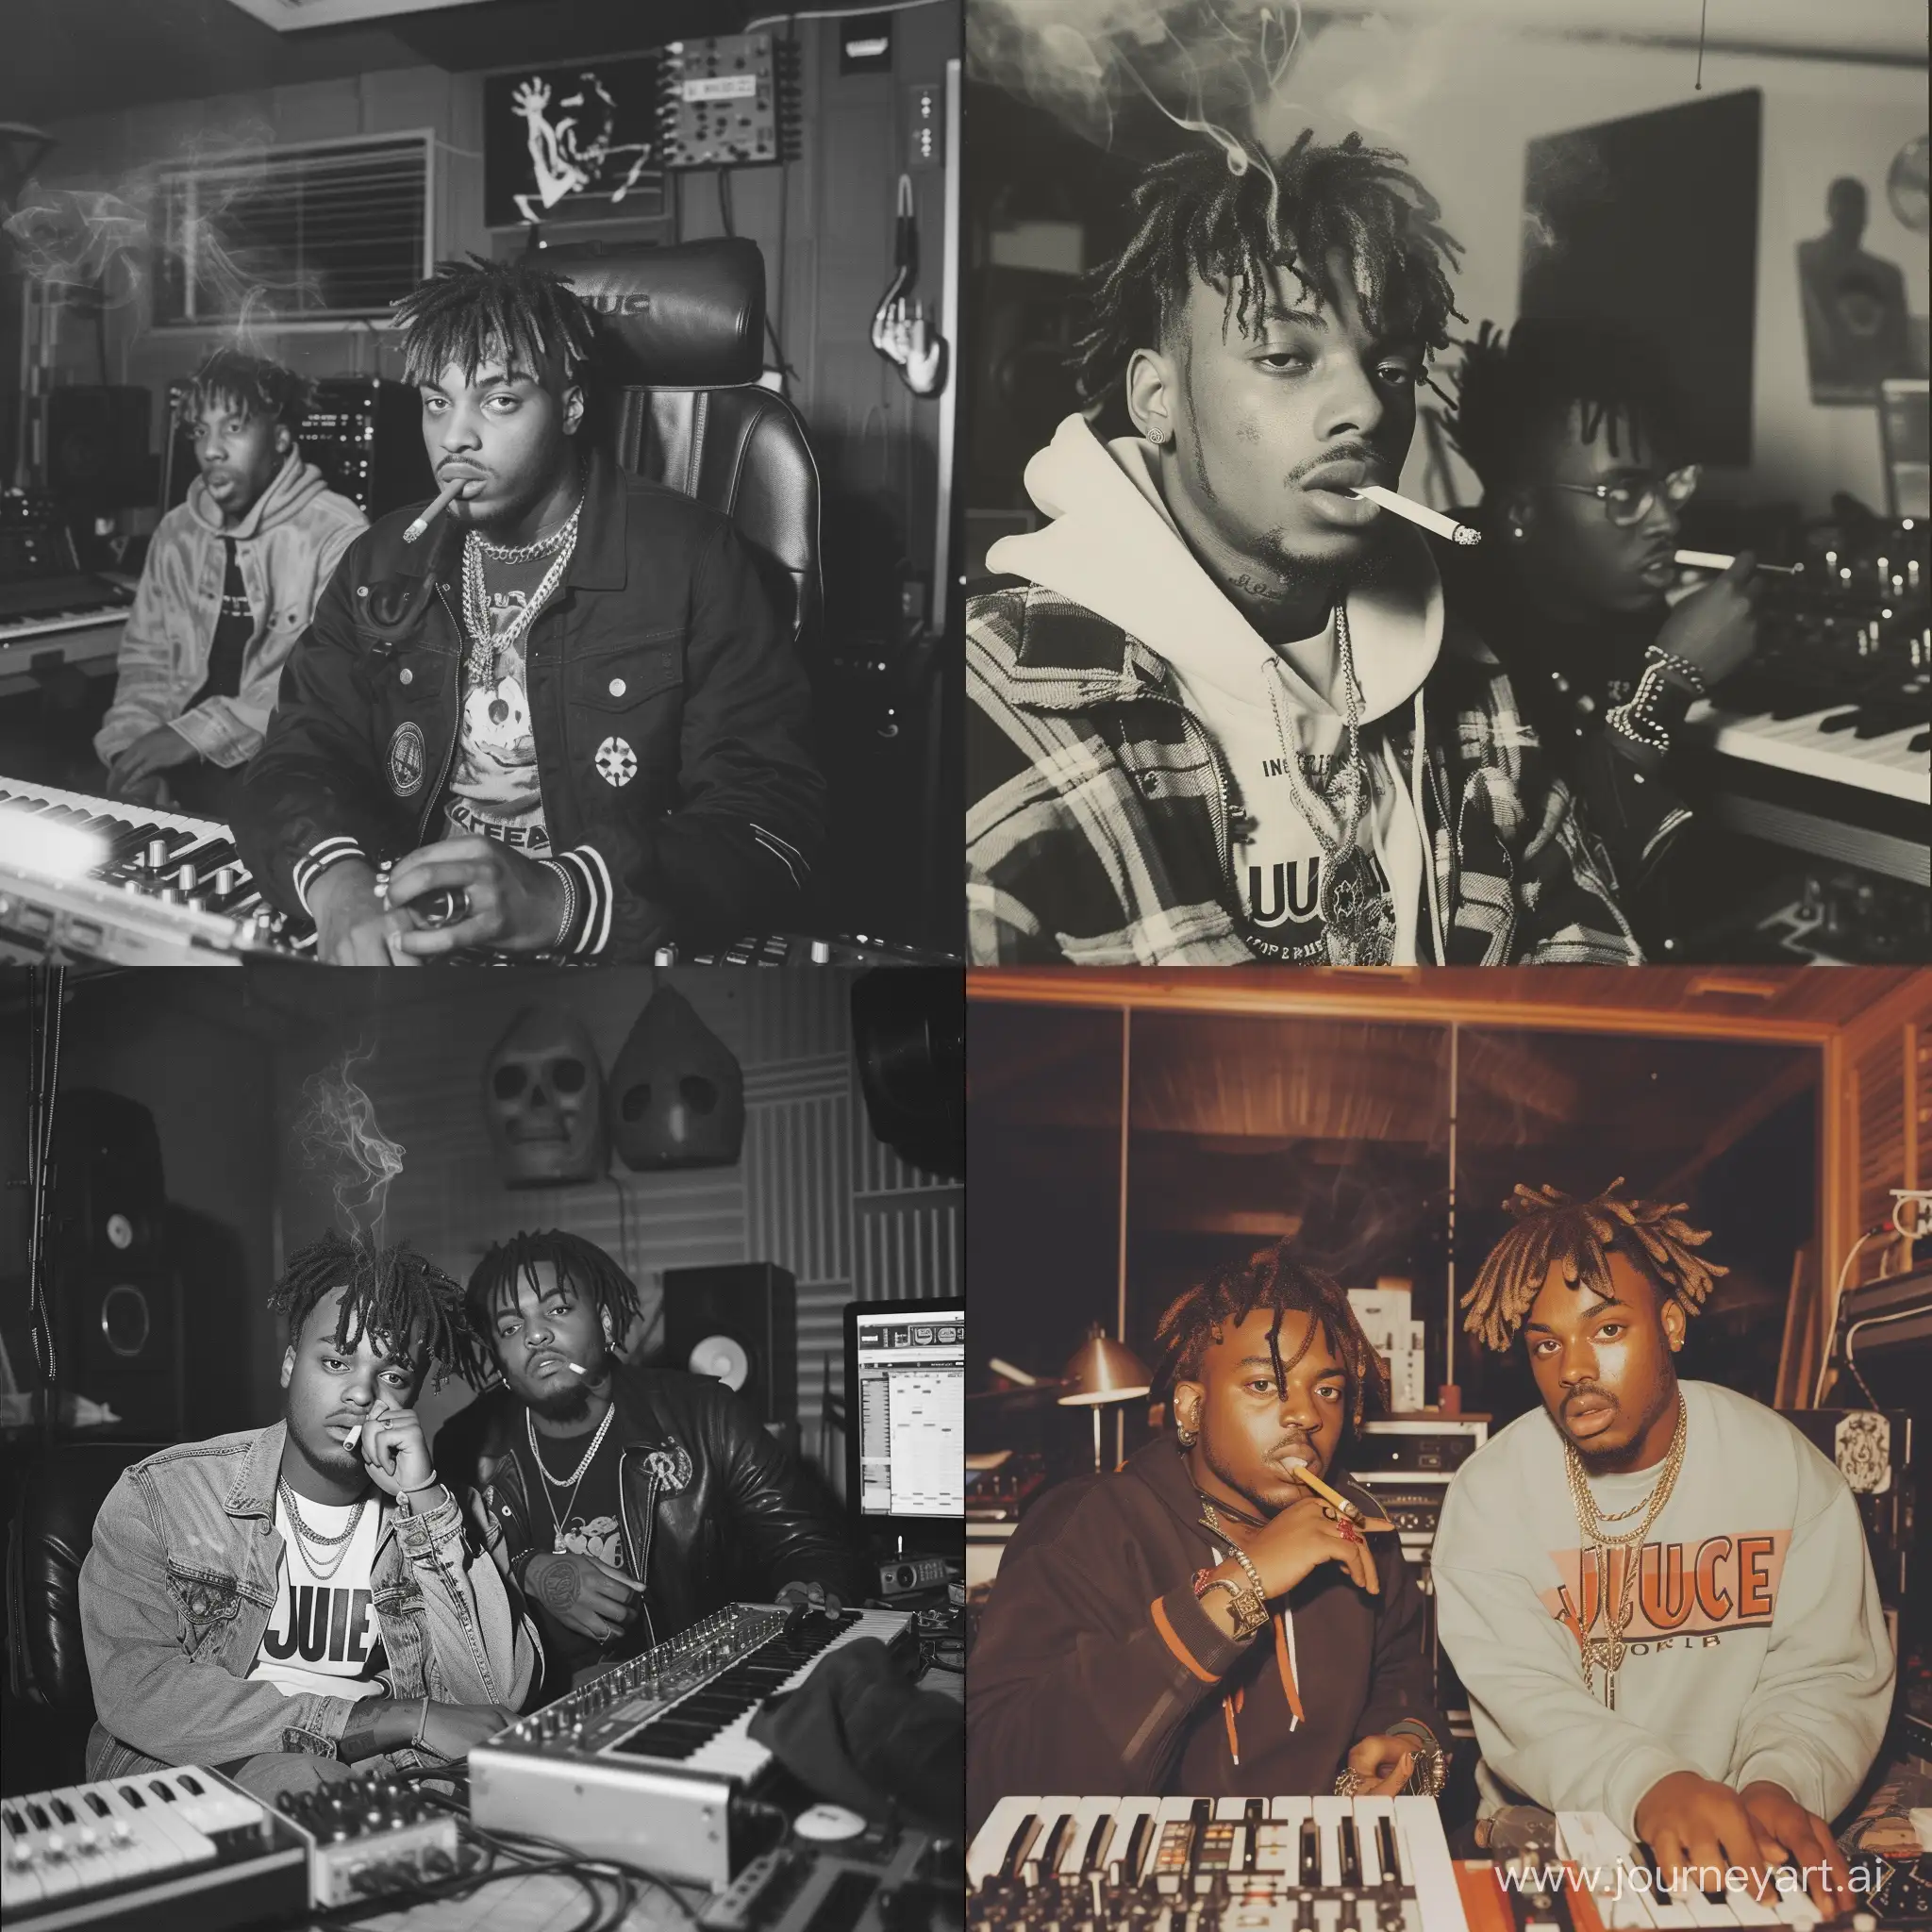 A 1960s Photograph of Juice WRLD with Joyner lucas Smoking in a Music Studio